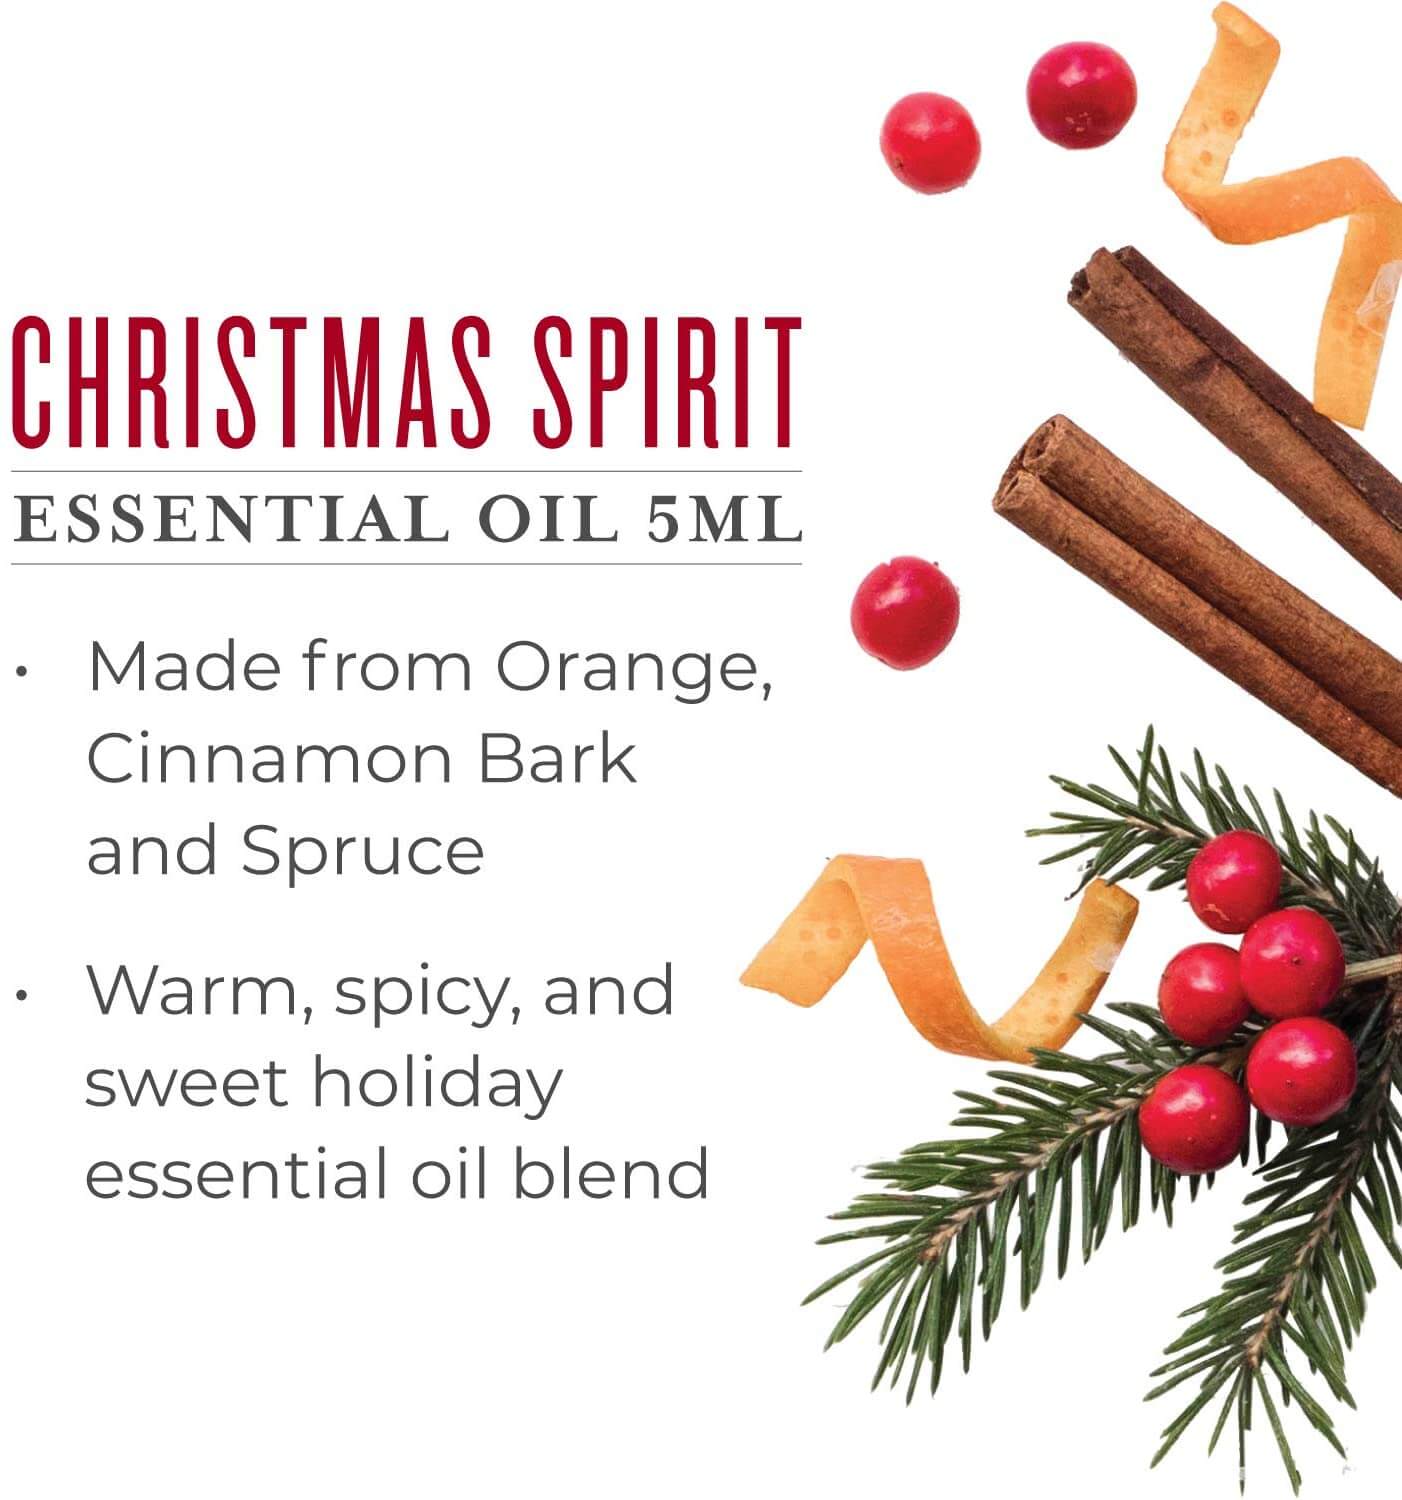 Christmas Spirit Blend by Young Living